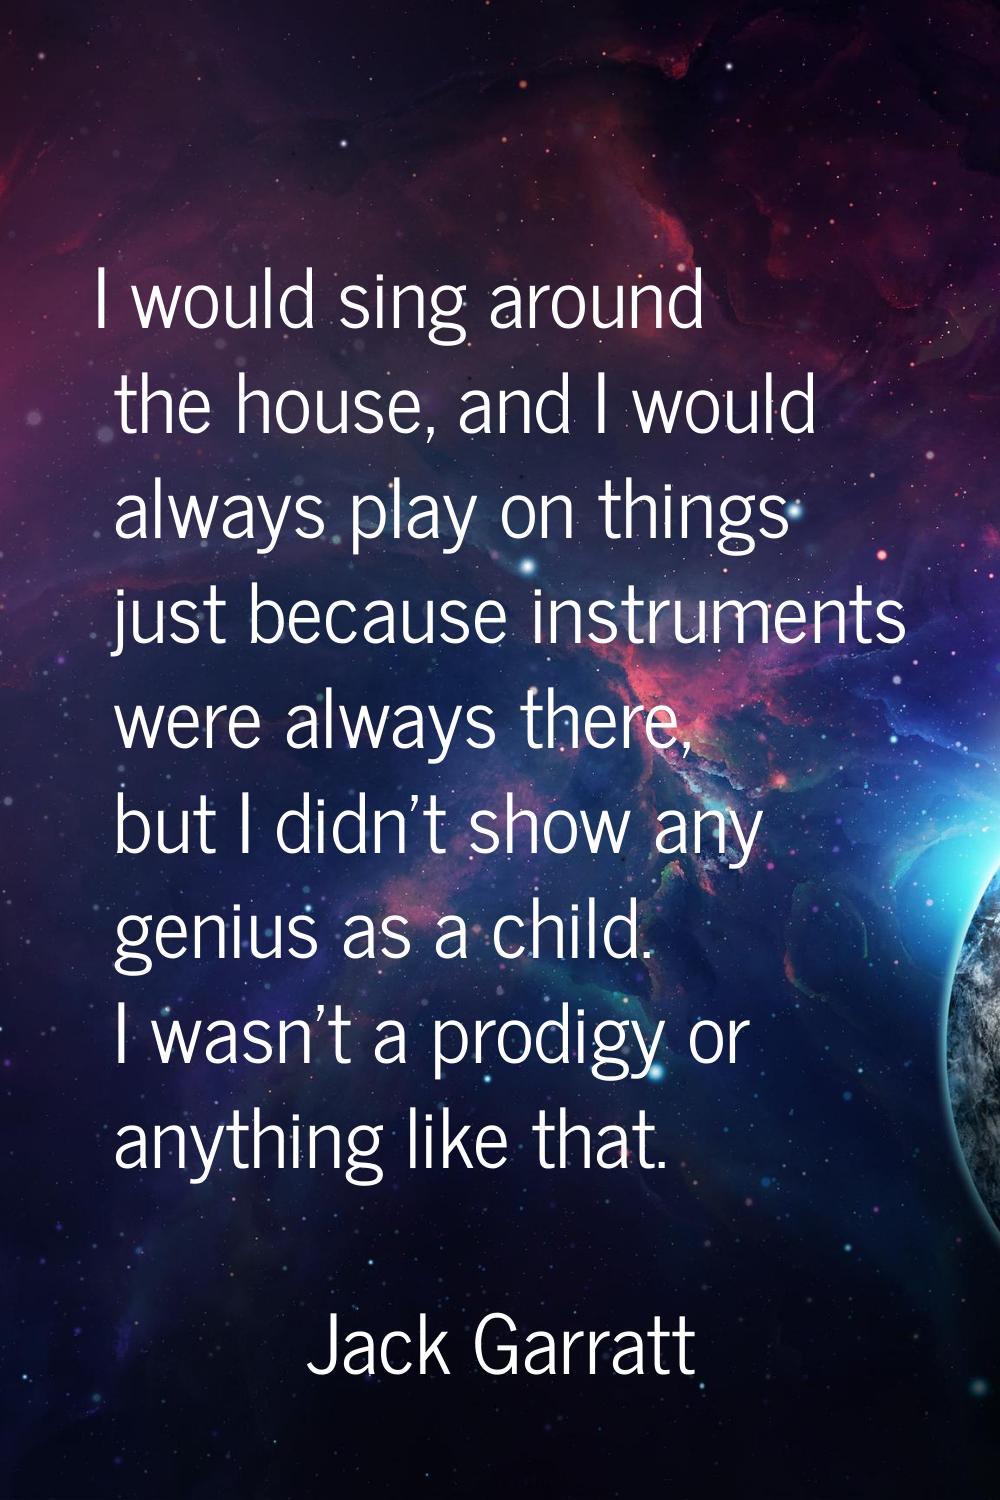 I would sing around the house, and I would always play on things just because instruments were alwa